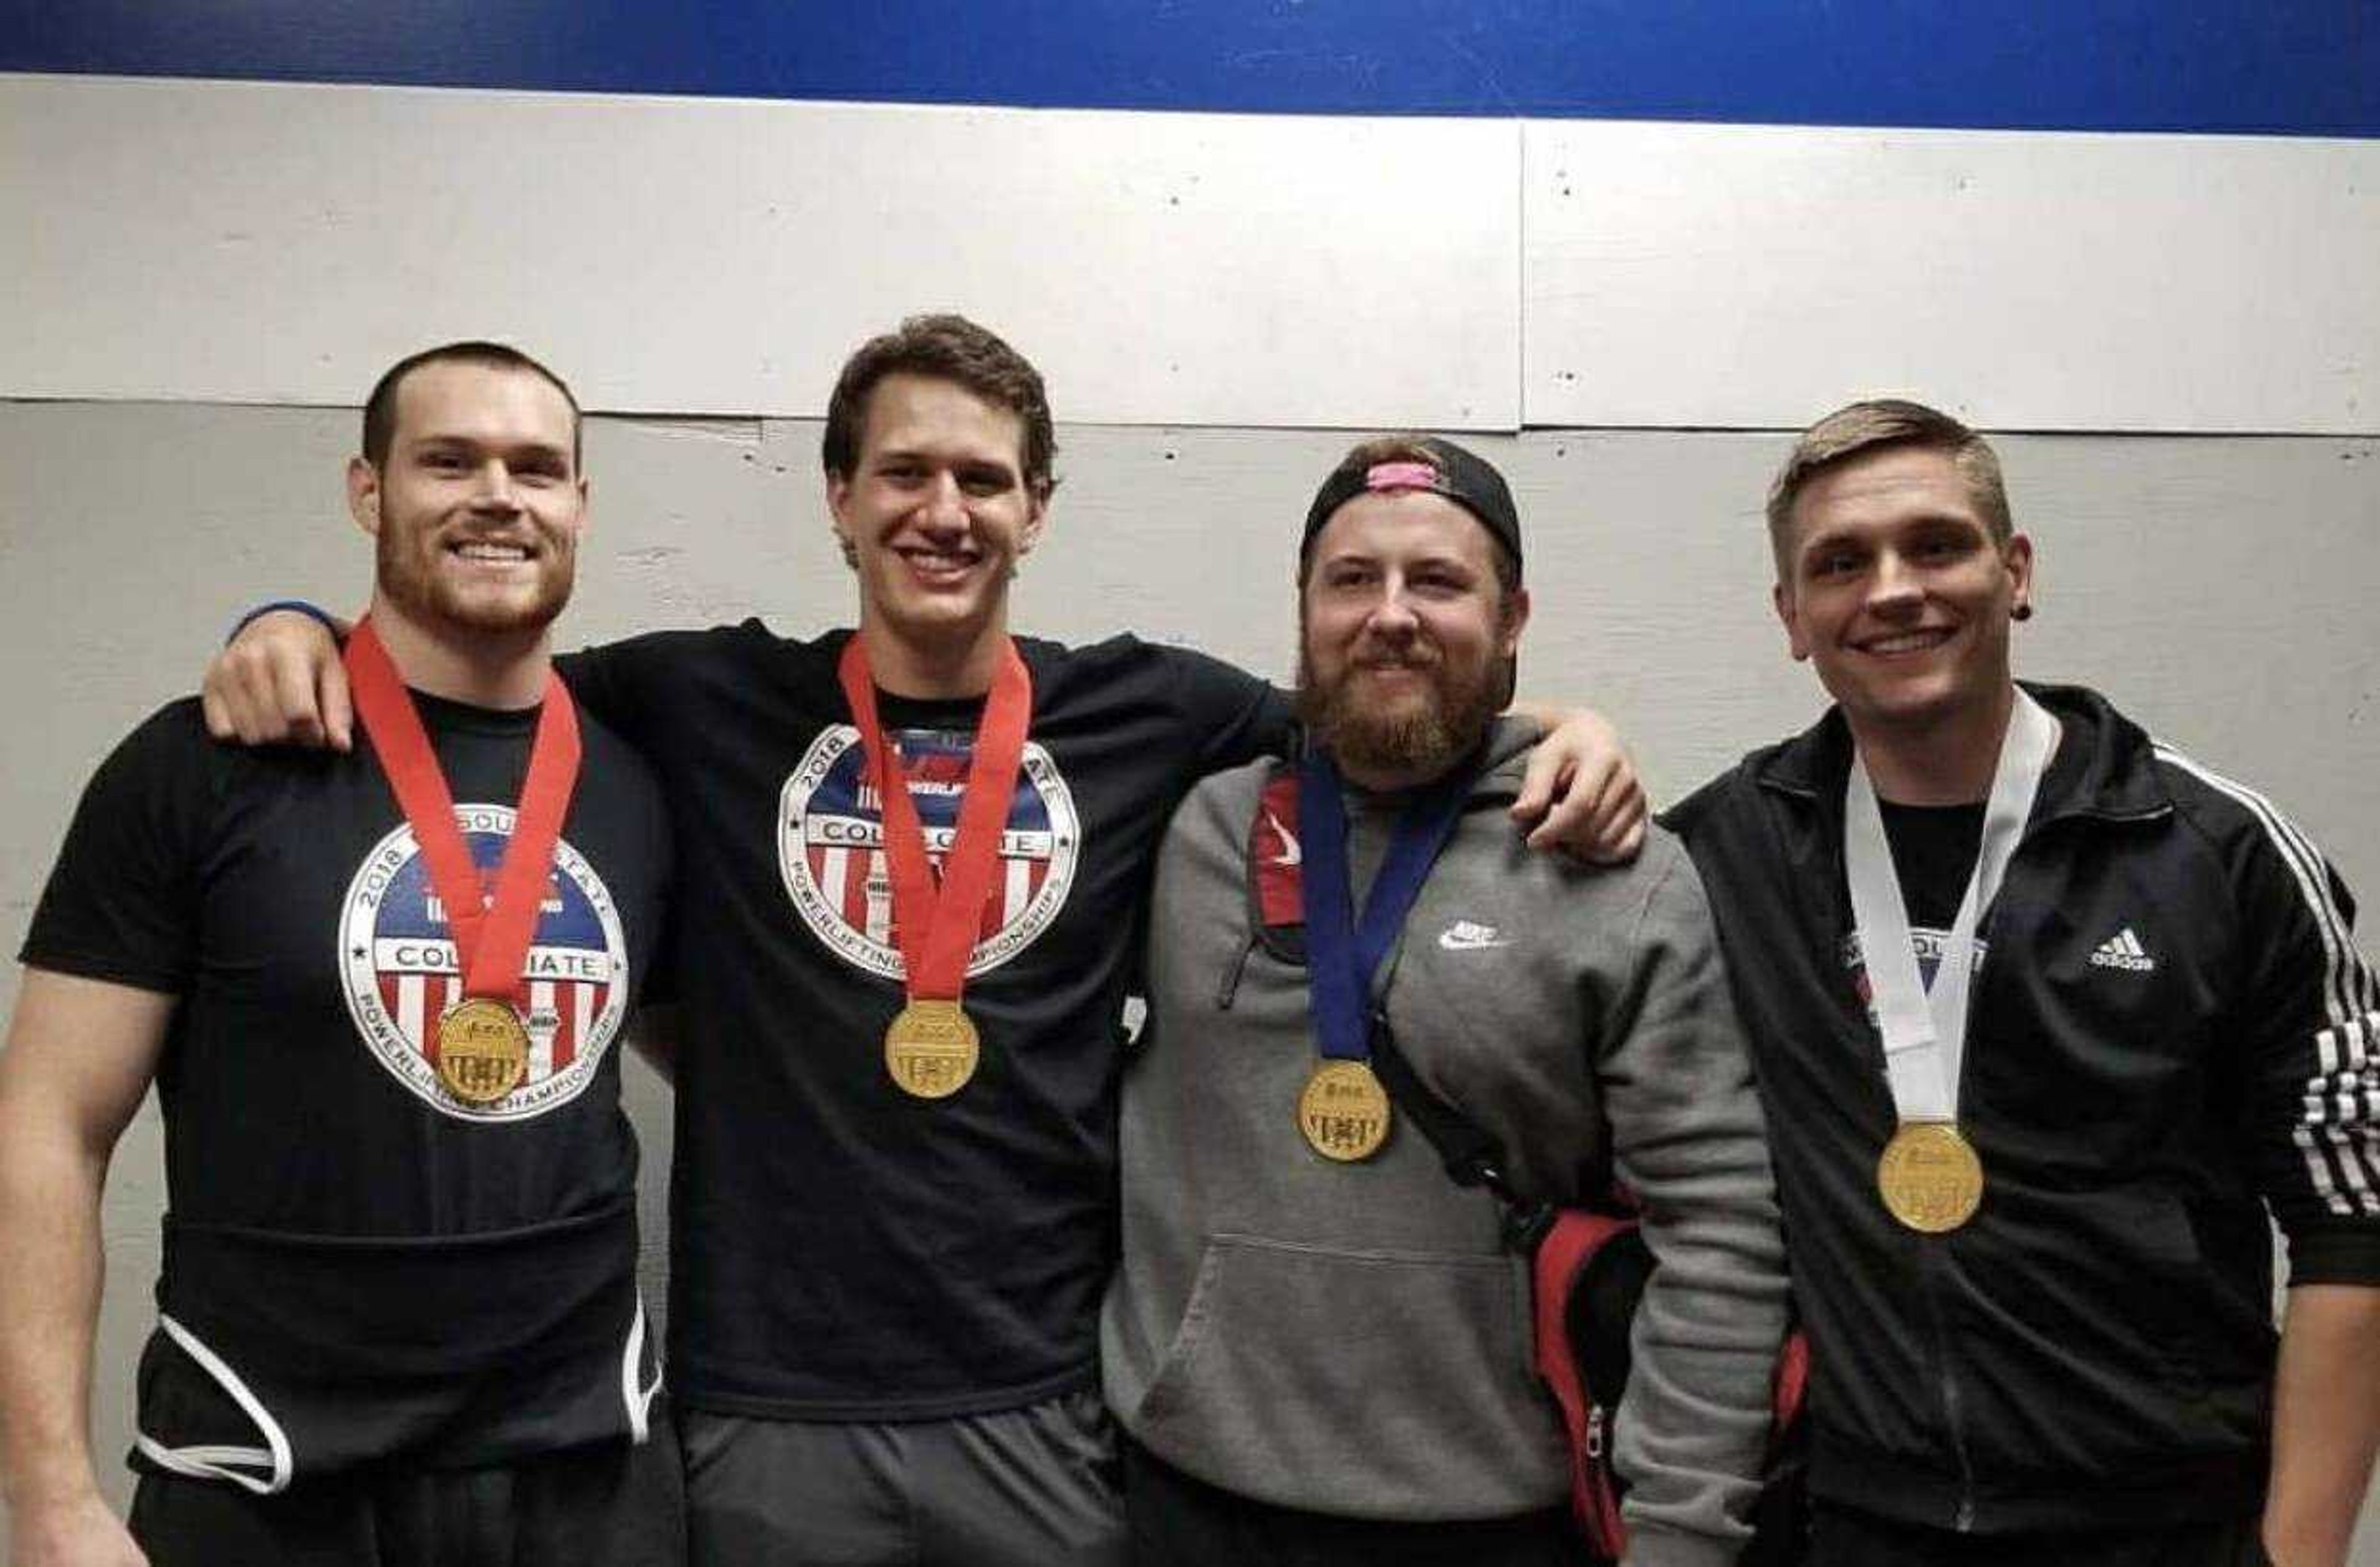 Southeast strength club posing with their medals after the Missouri Collegiate Powerlifting Champions in Columbia, MO in 2018. 
(Left to right: Ed Meixner, Kurt Holderle, Seth Sievers, Patryk Piekarczyk)